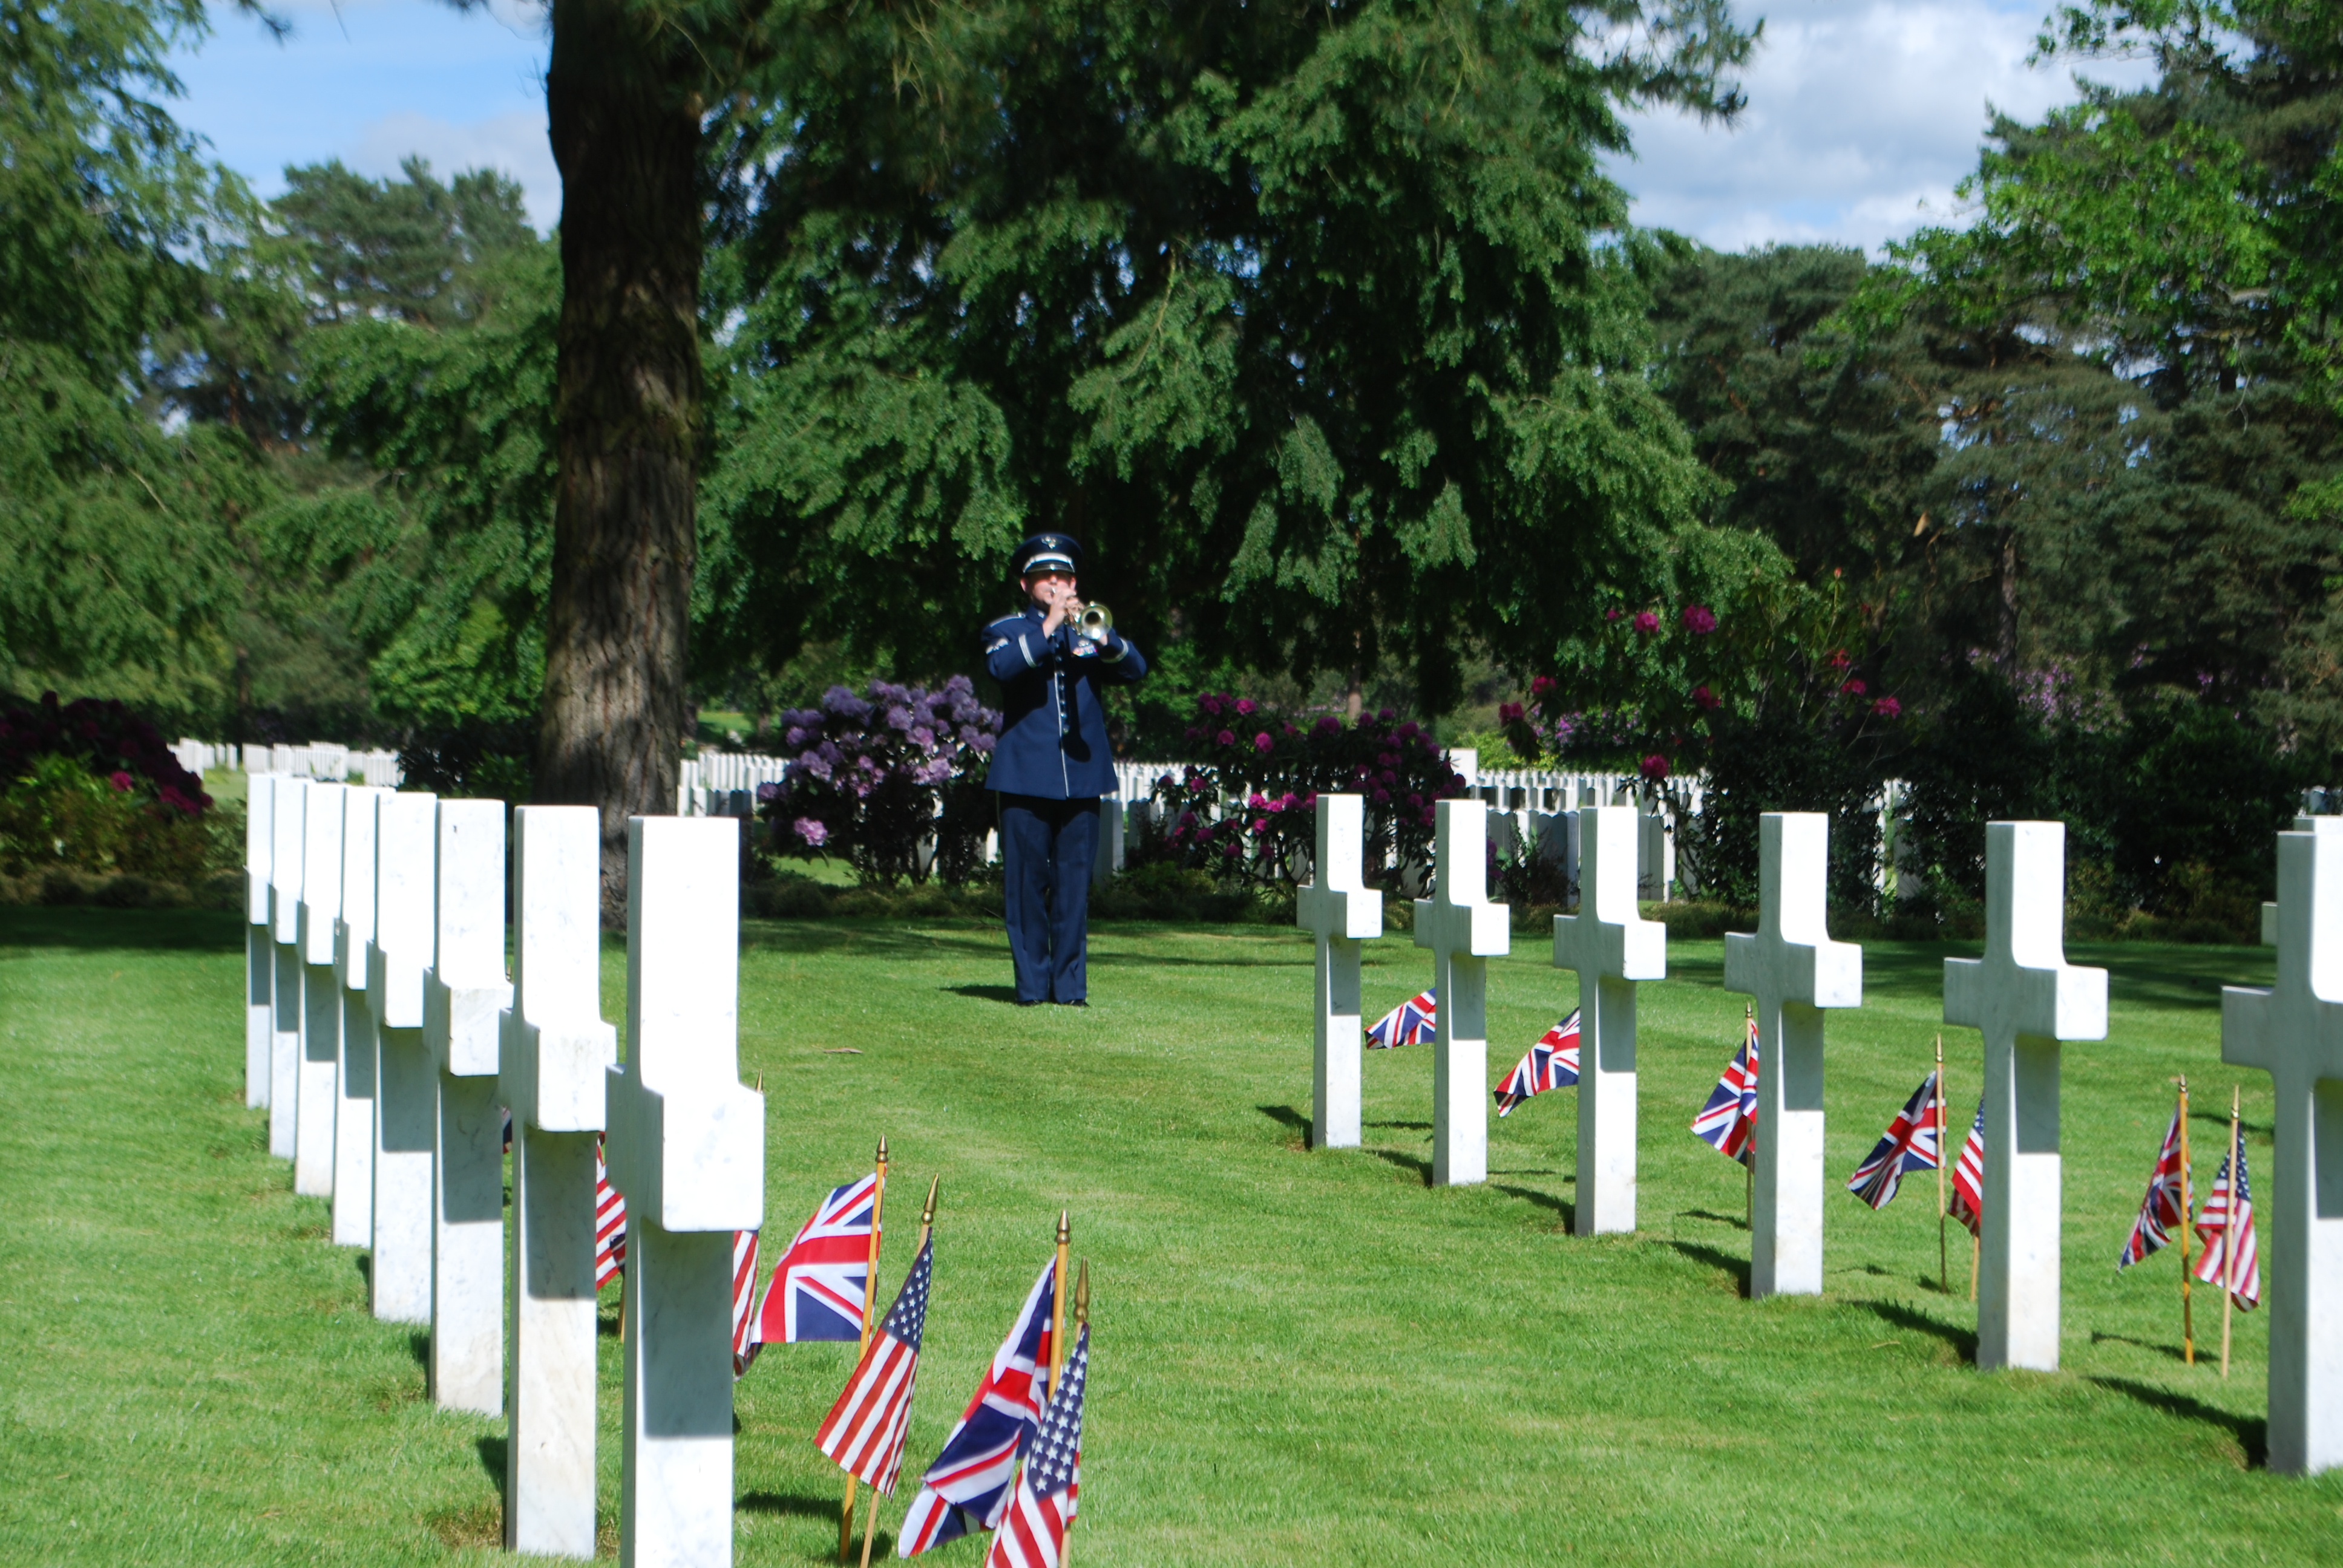 A bugler stands amongst the headstones and plays. 